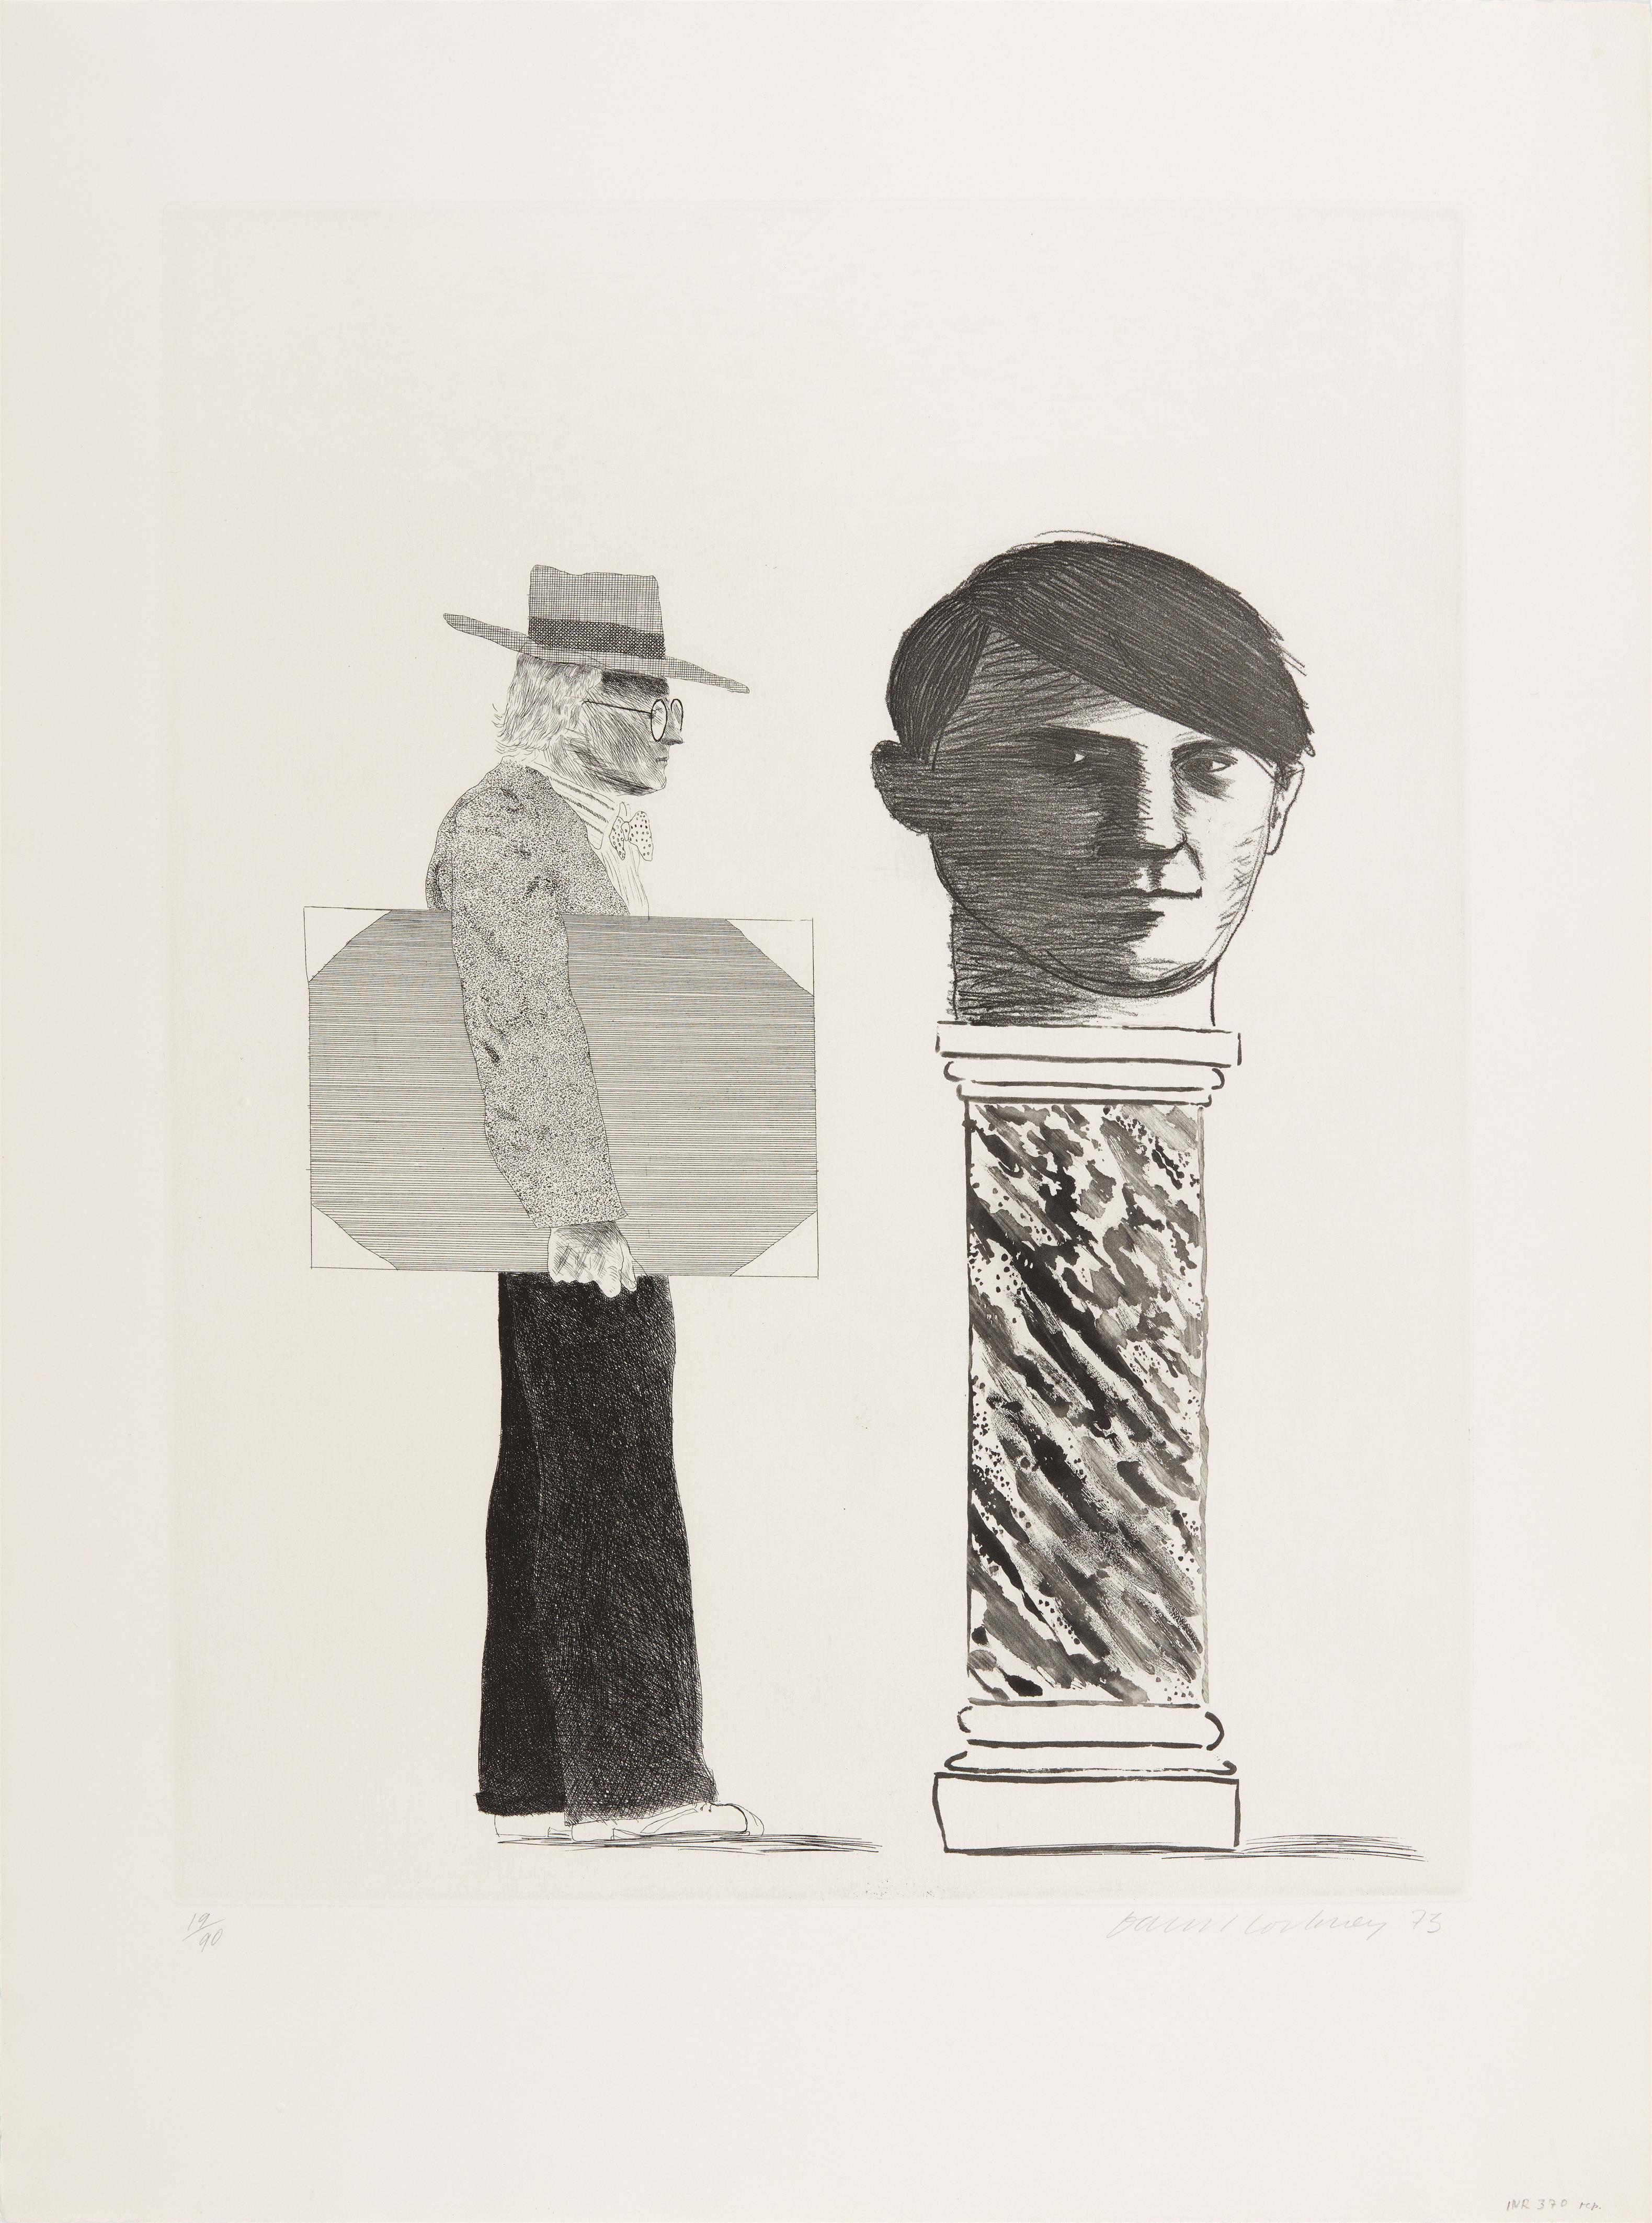 David Hockney - The Student (Aus: Homage to Picasso) - image-1